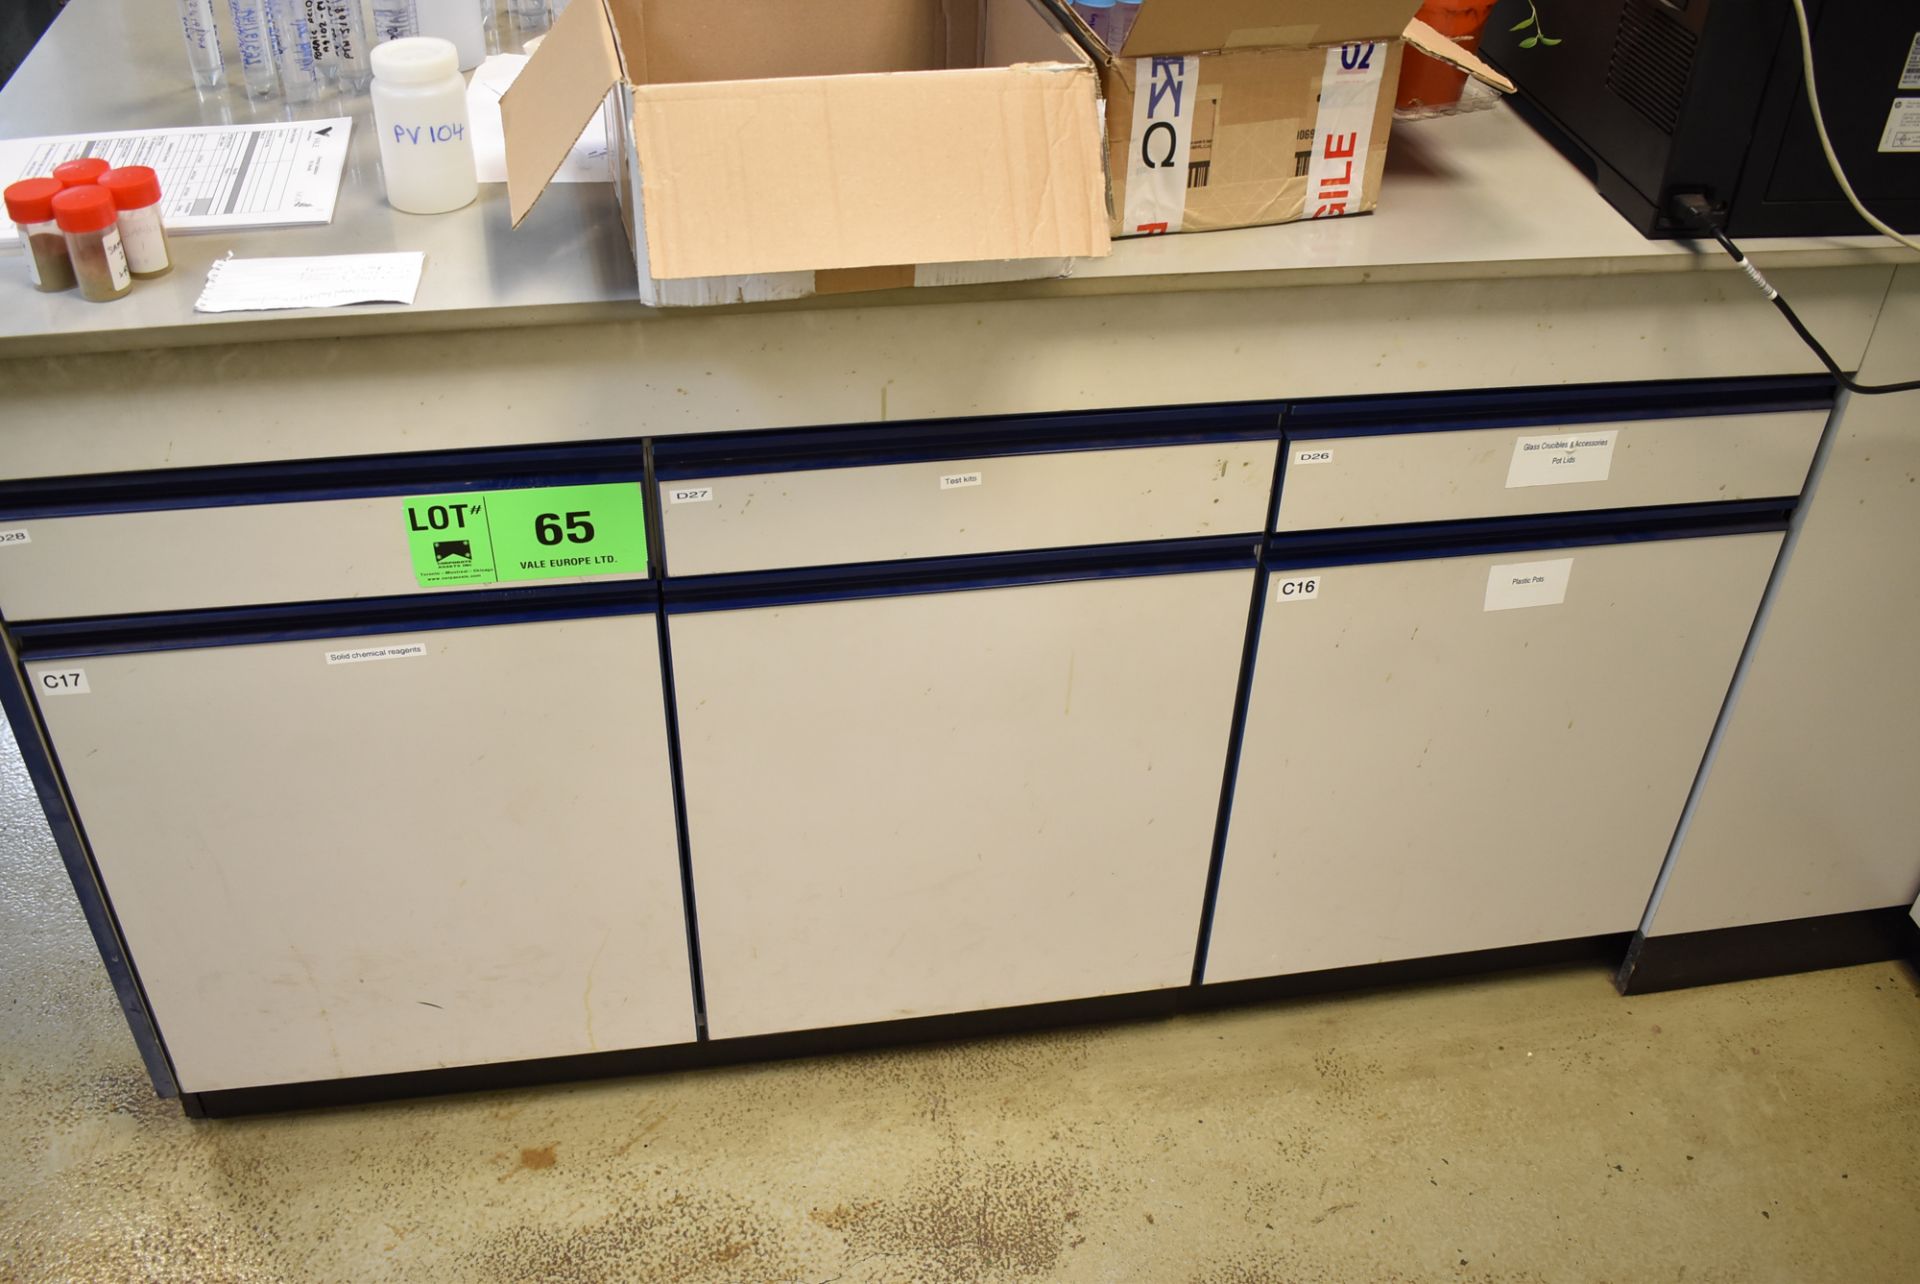 LOT/ 3 SECTION LAB STORAGE CABINET WITH CONTENTS - TEST KITS, GLASSWARE, PLASTIC PODS (ROOM 264) [